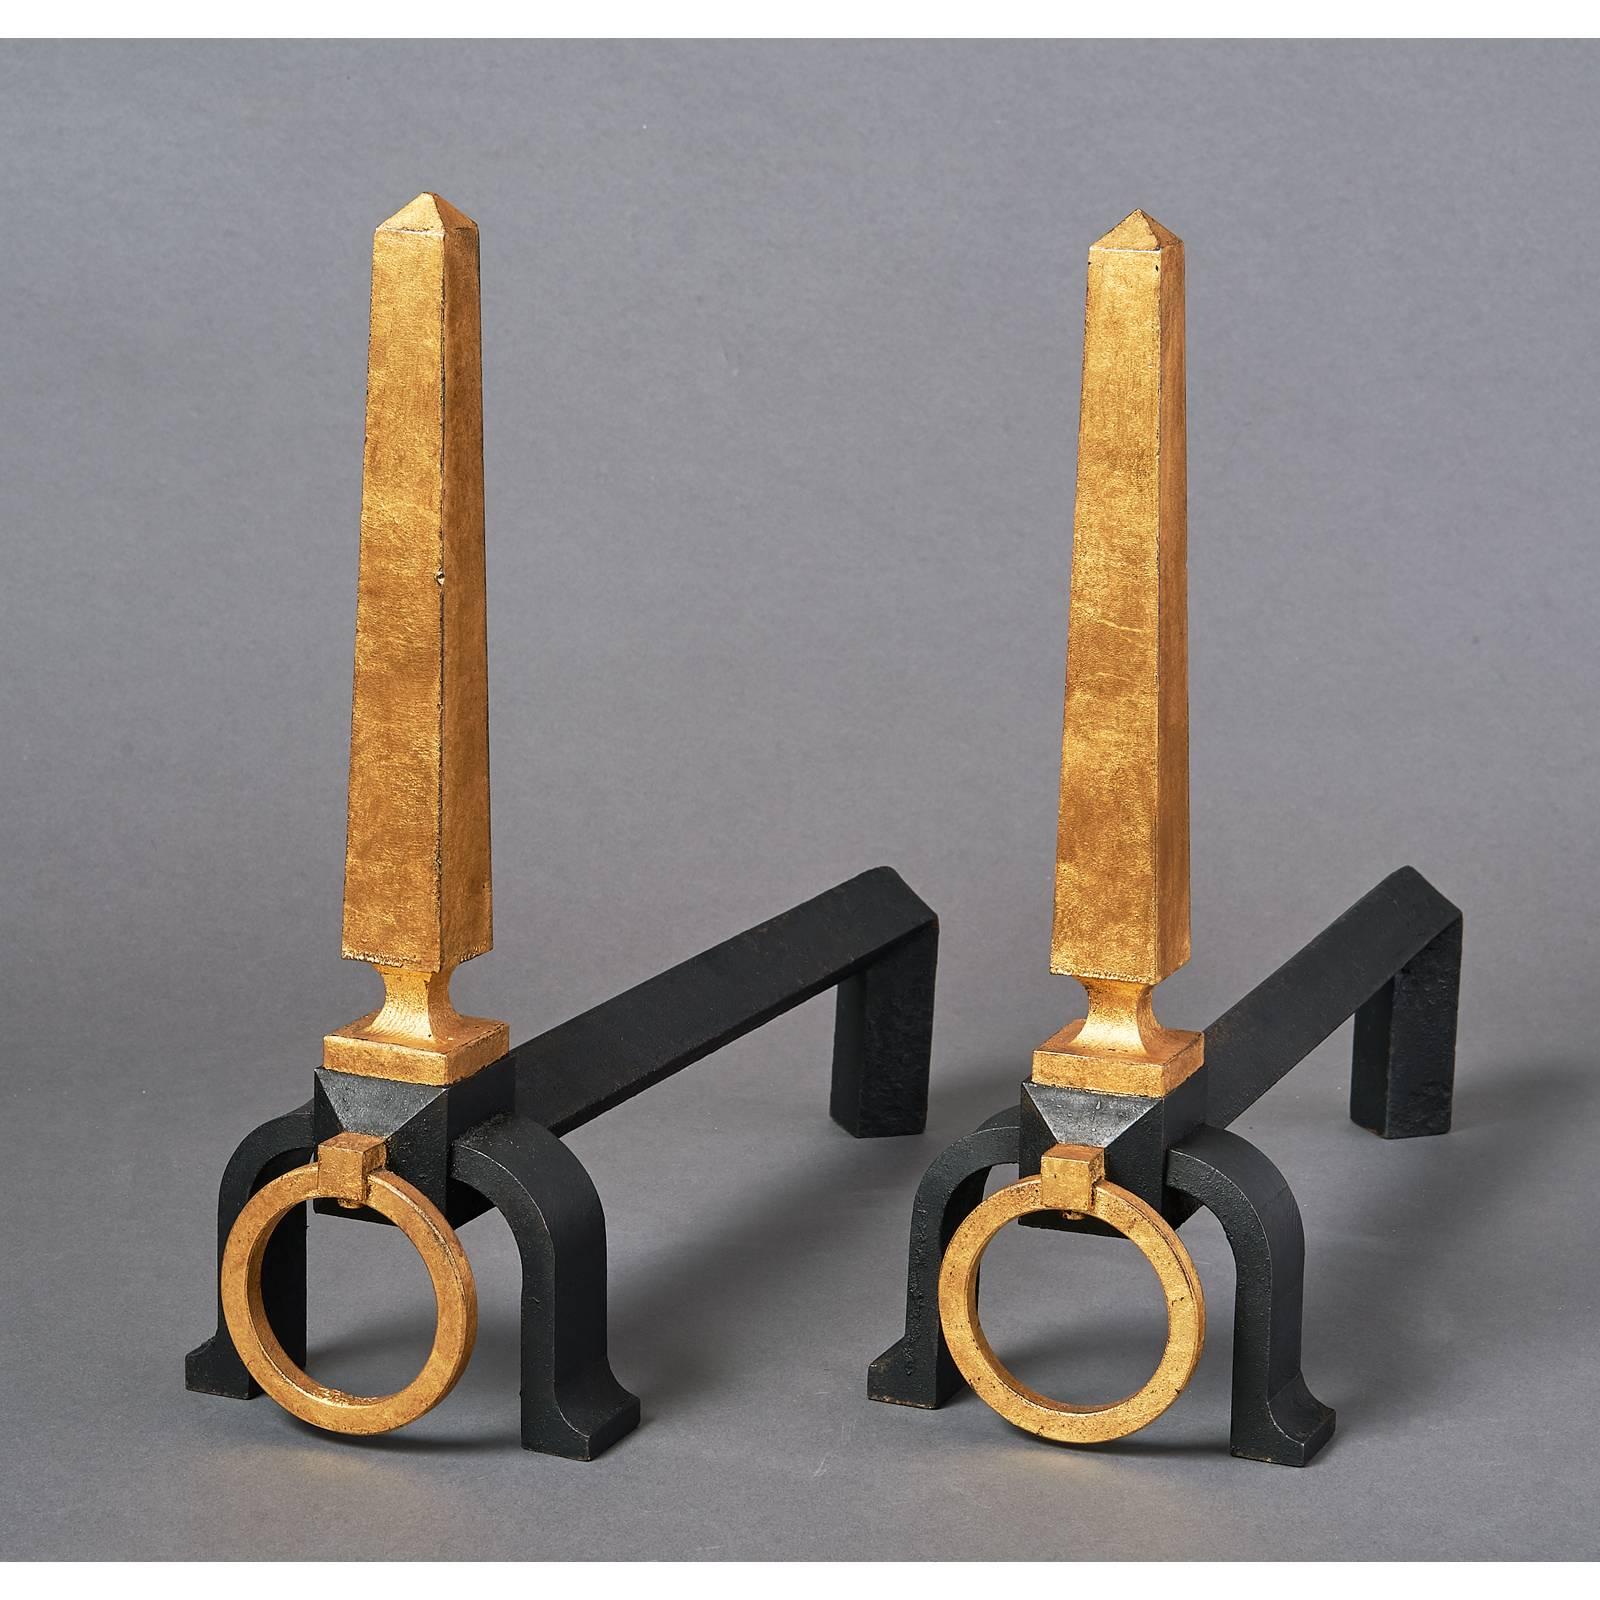 Gilbert Poillerat (1902-1988), attributed to
Handsome and important pair of partial gilt wrought iron andirons with obelisk and ring decor
France, 1950s.
Measures: 6 W x 18 D x 16 H.
Ref: Similar model Gilbert Poillerat by Francois Baudot, p.228.